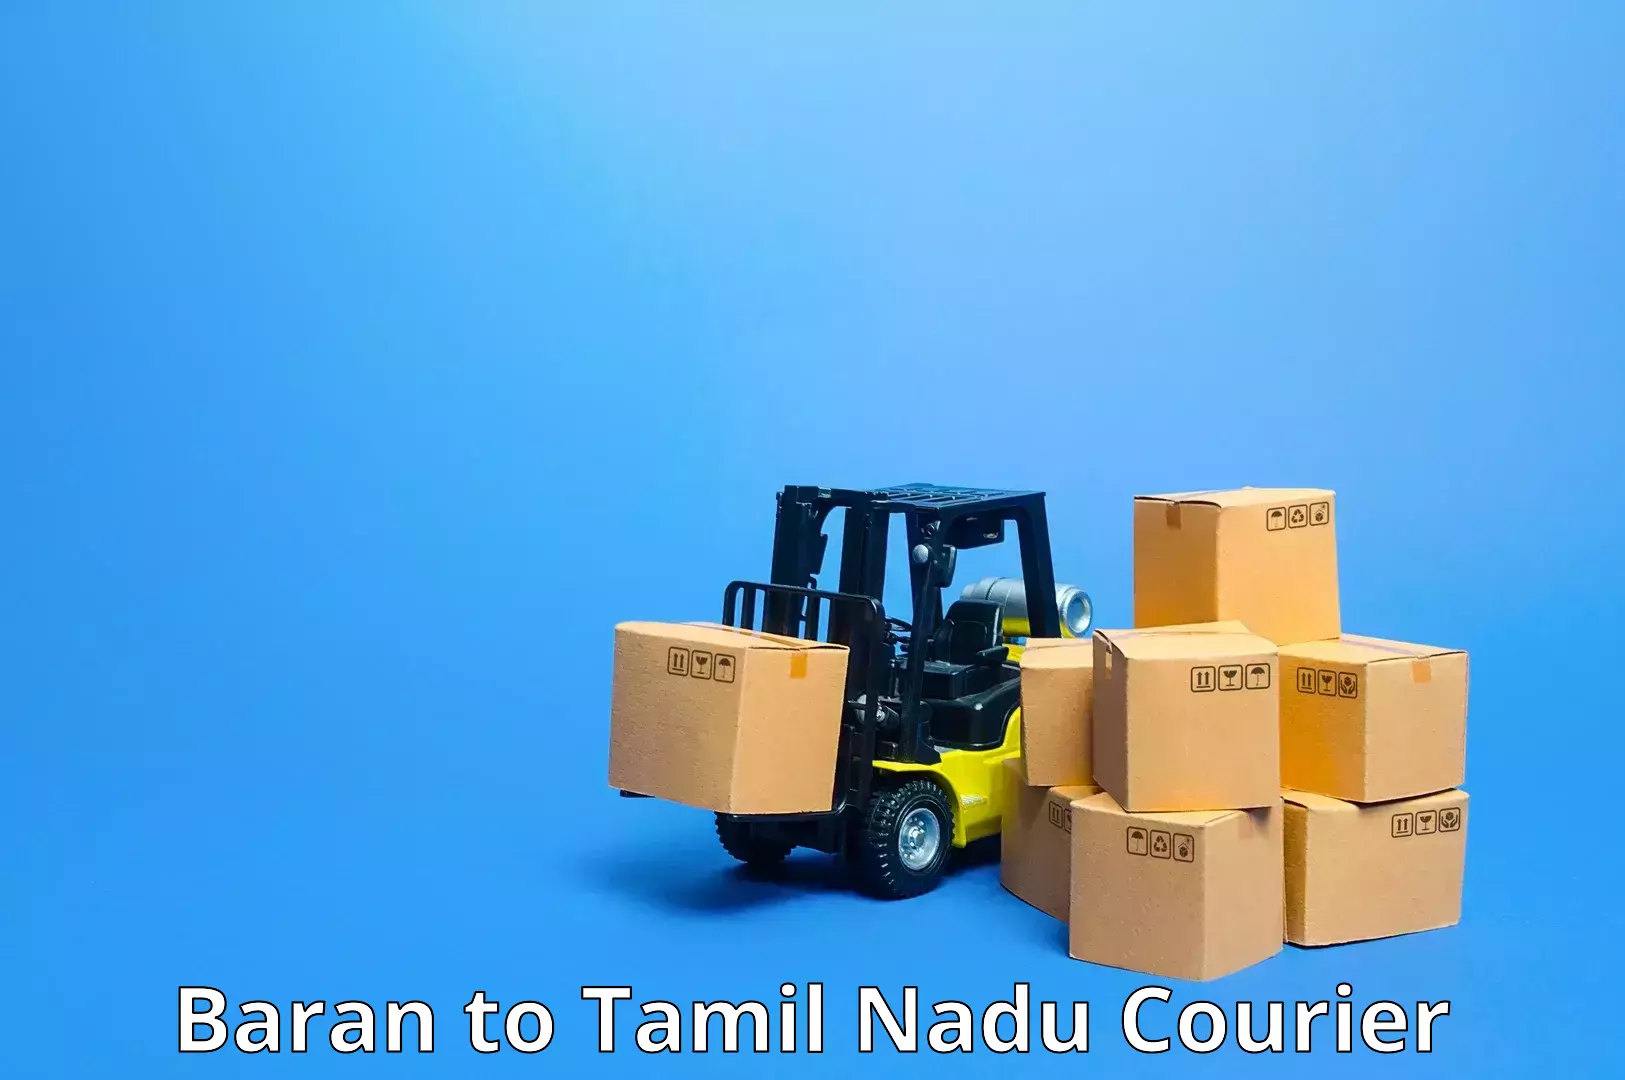 On-call courier service Baran to Vellore Institute of Technology